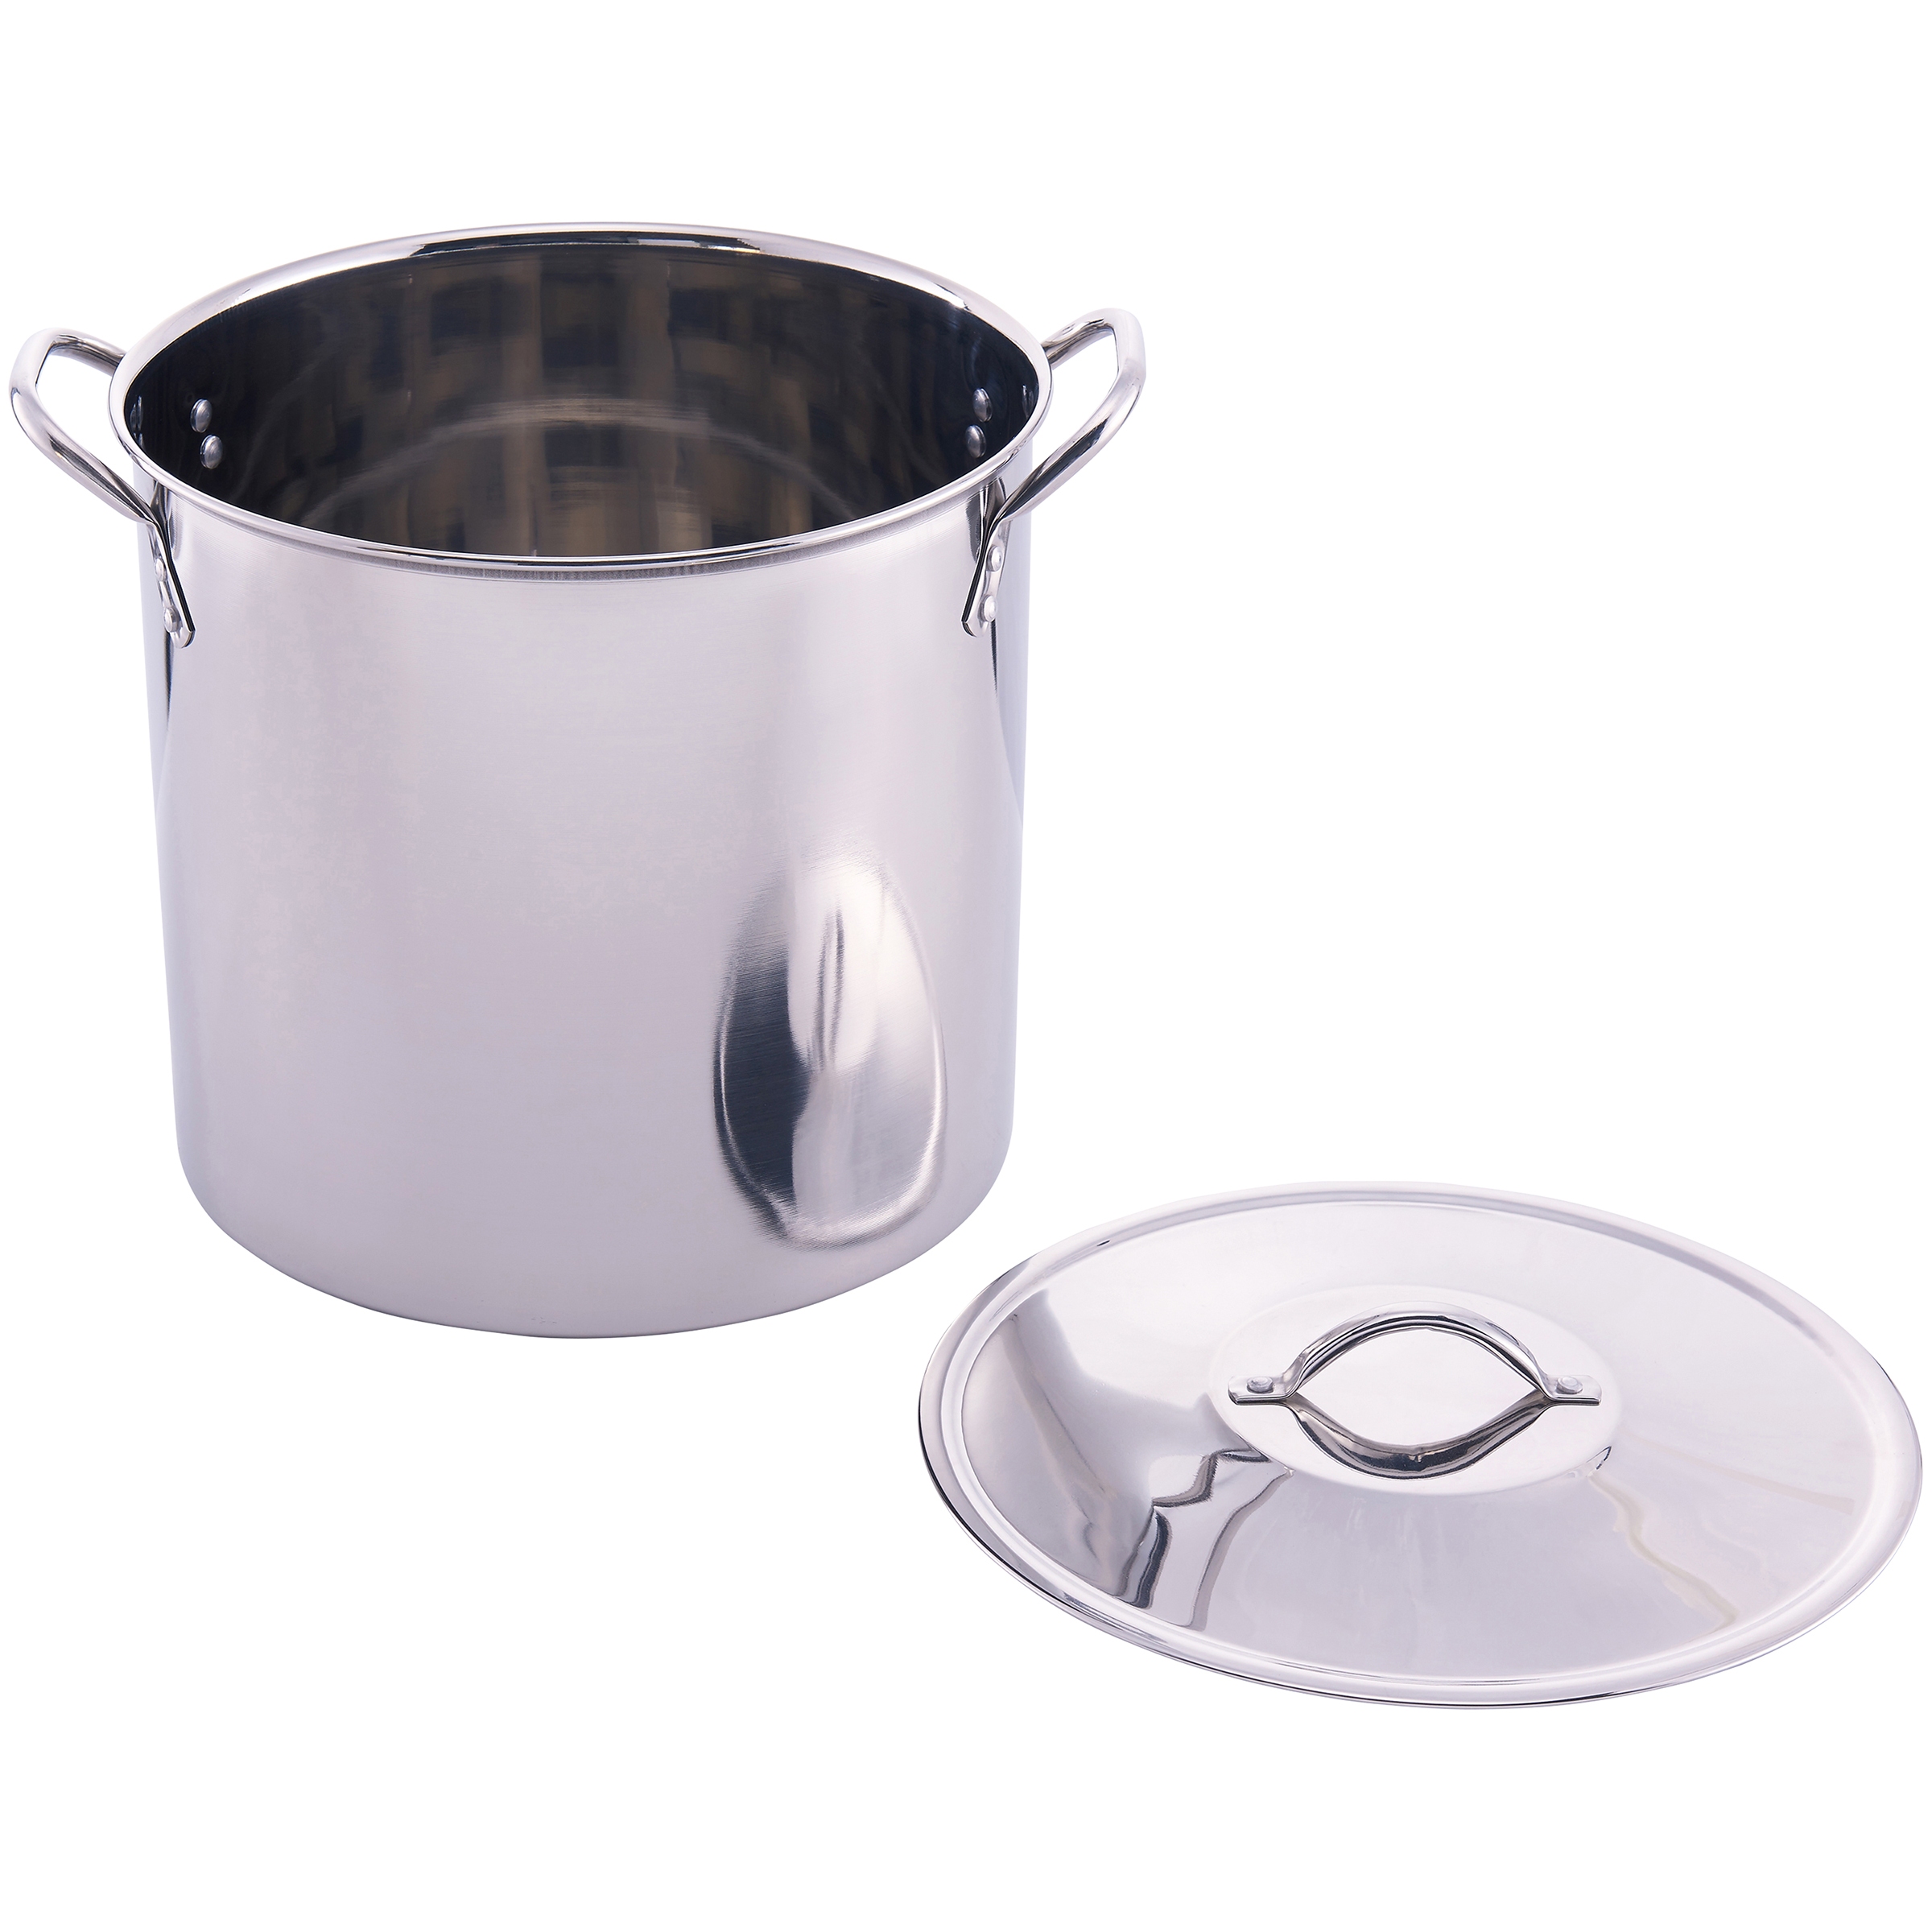 Mainstays 16-Qt Stainless Steel Stock Pot with Metal Lid - image 3 of 4